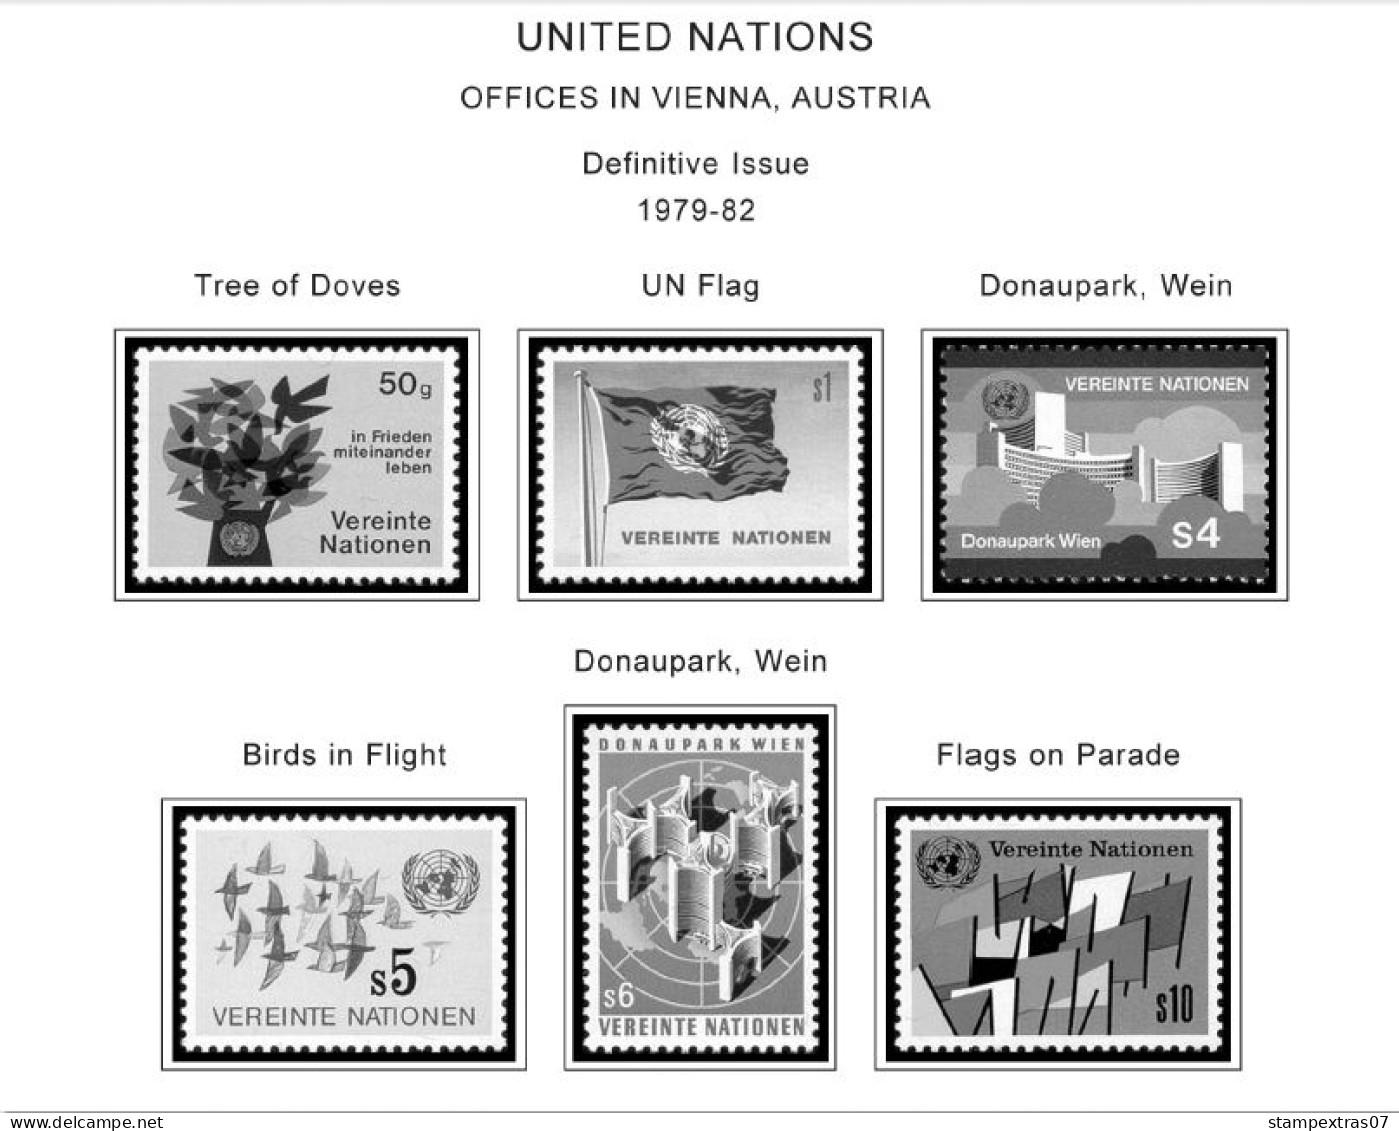 UNITED NATIONS - VIENNA 1979-2020 STAMP ALBUM PAGES (165 B&w Illustrated Pages) - English